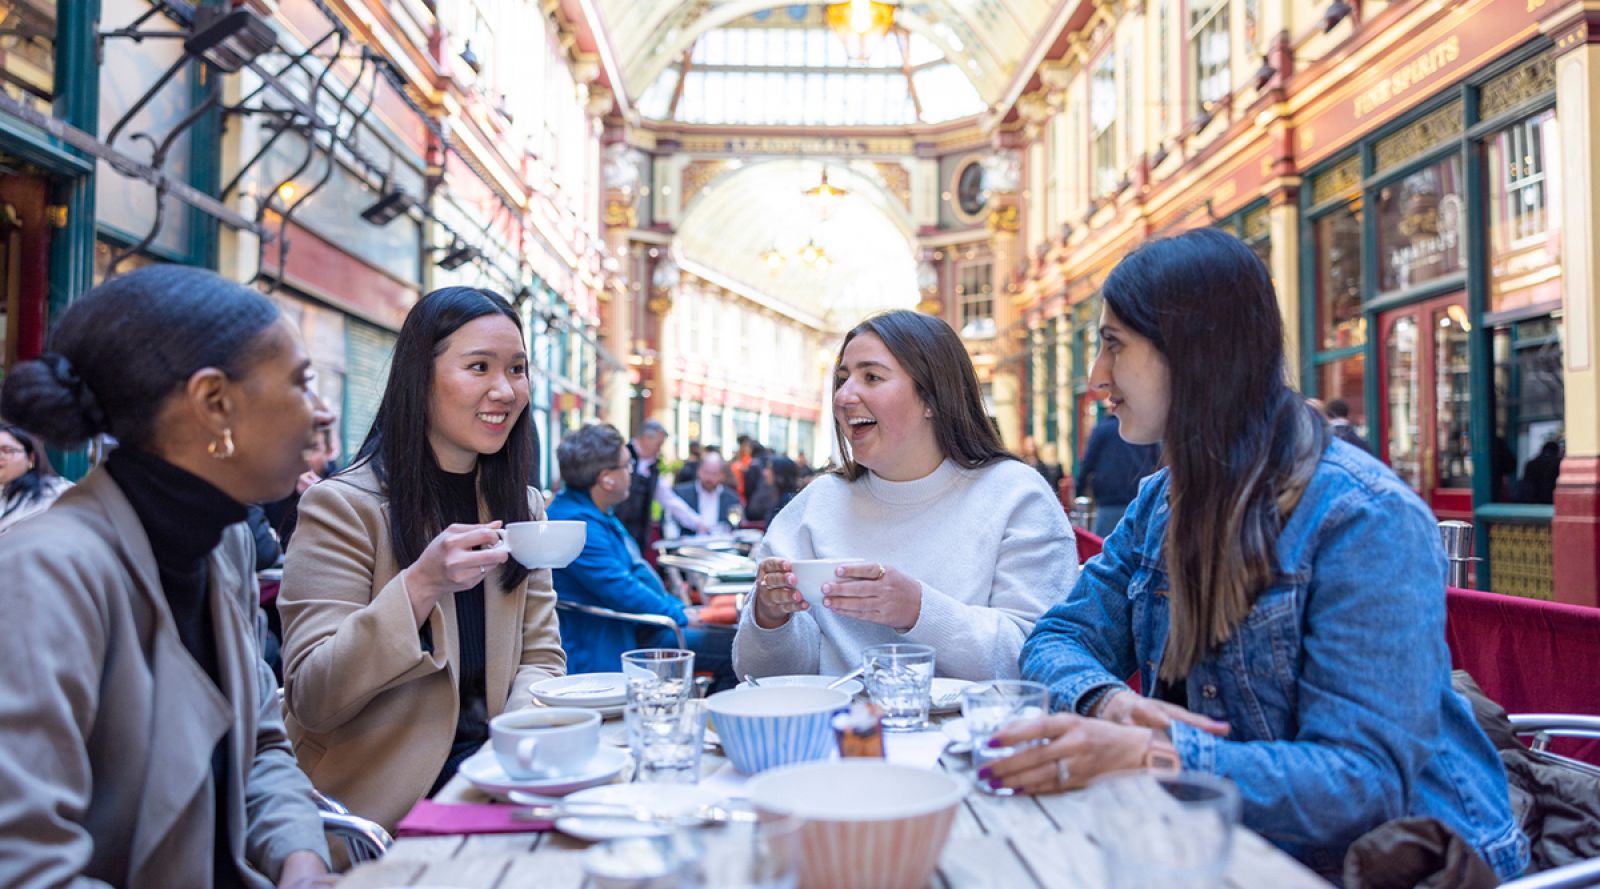 A group of women sitting at a table inside Leadenhall Market enjoying a cup of tea.